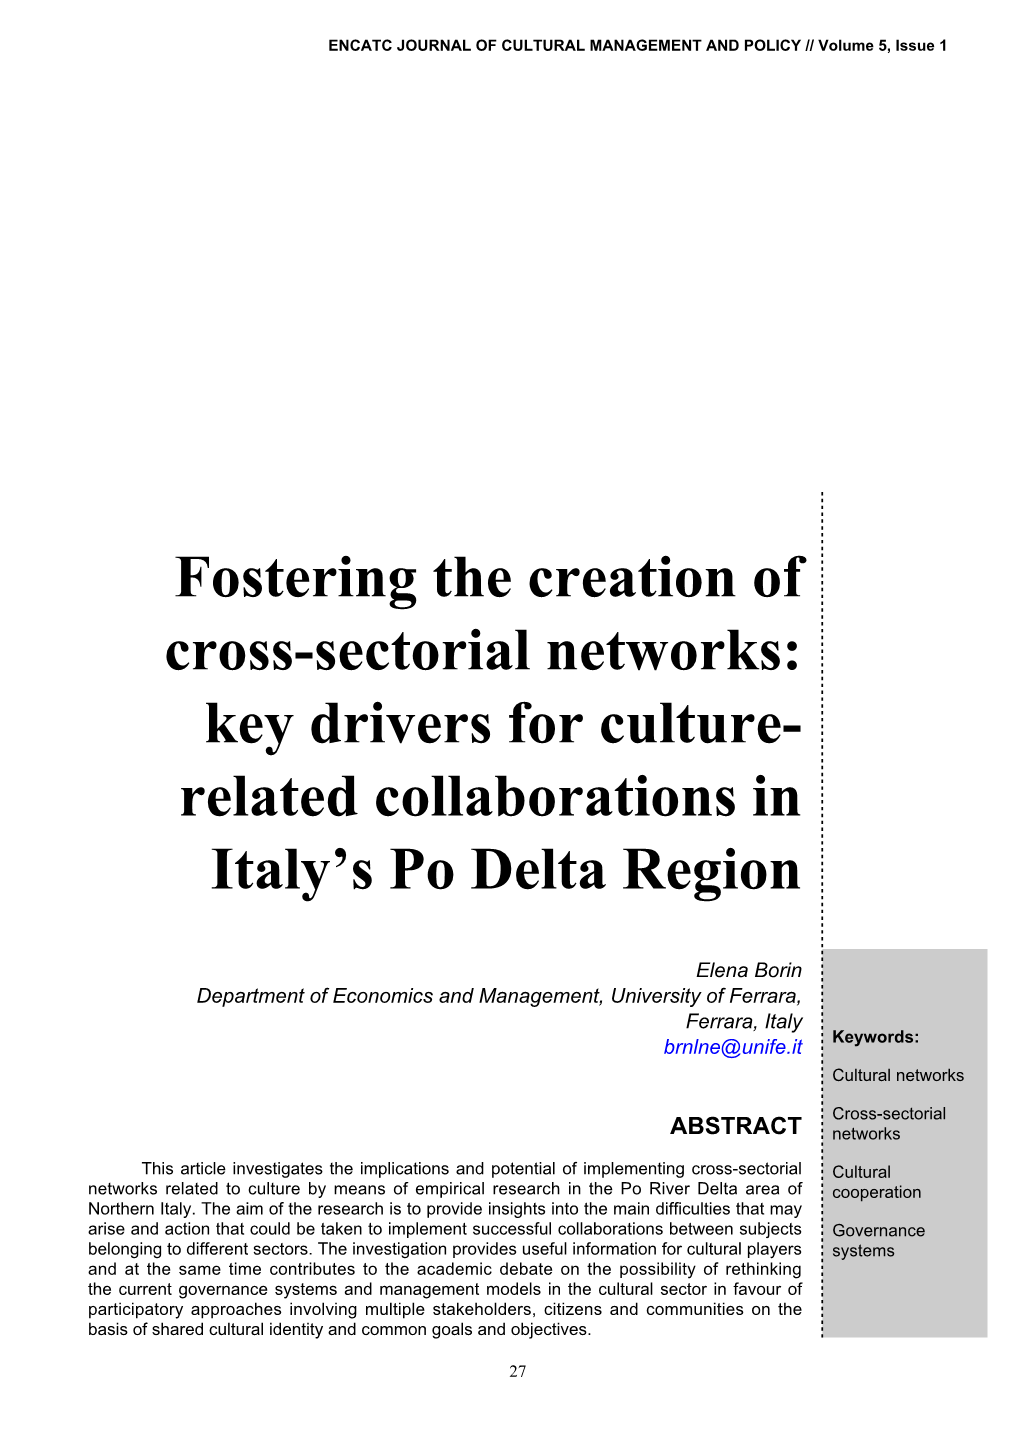 Related Collaborations in Italy's Po Delta Region